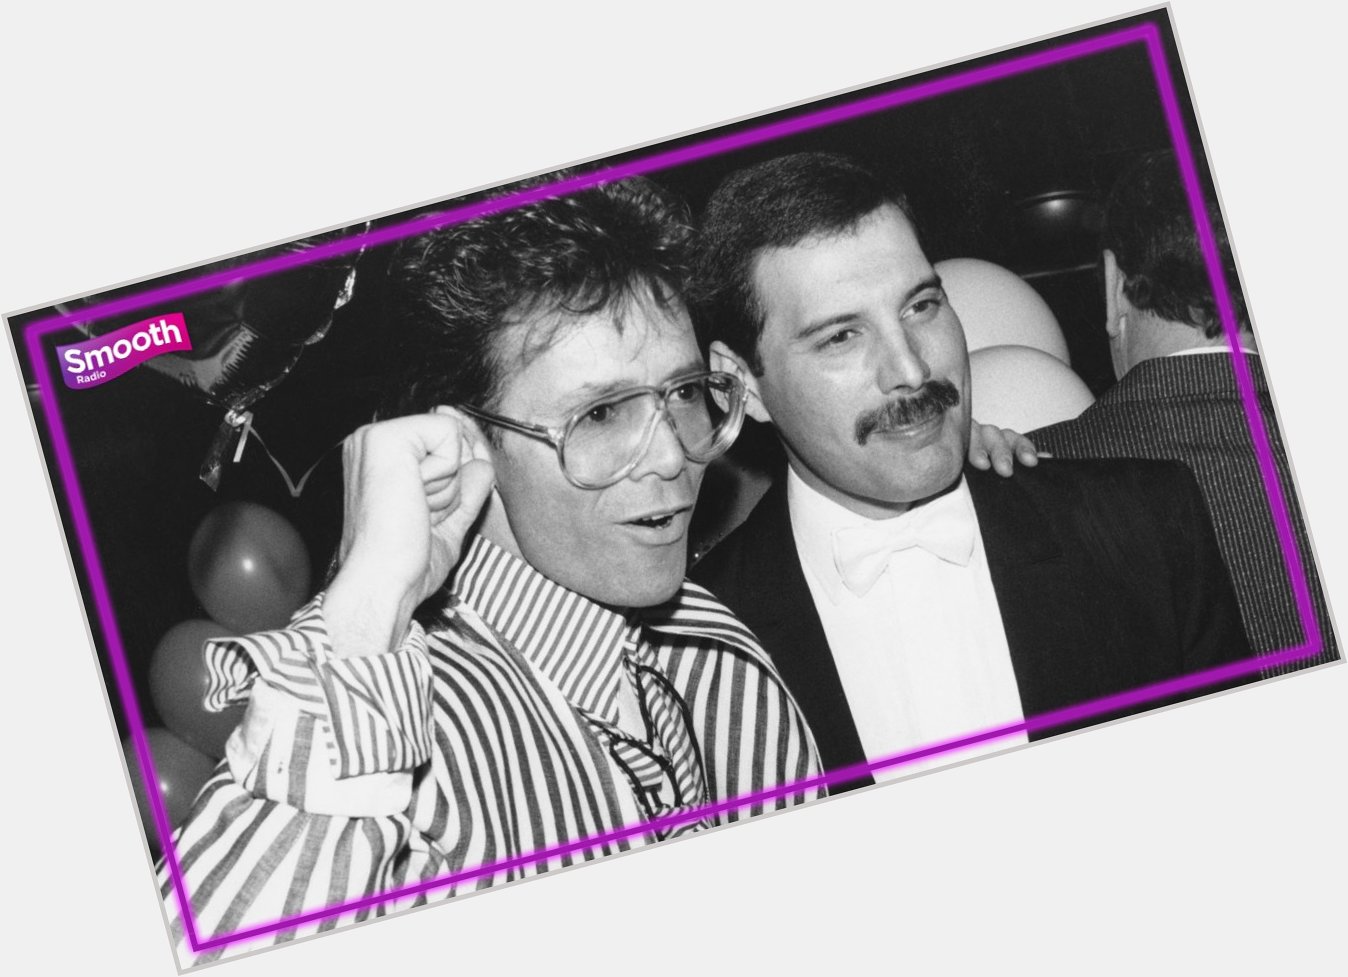 Happy 80th birthday, Sir Cliff Richard! Here he is with good pal Freddie Mercury back in \86 